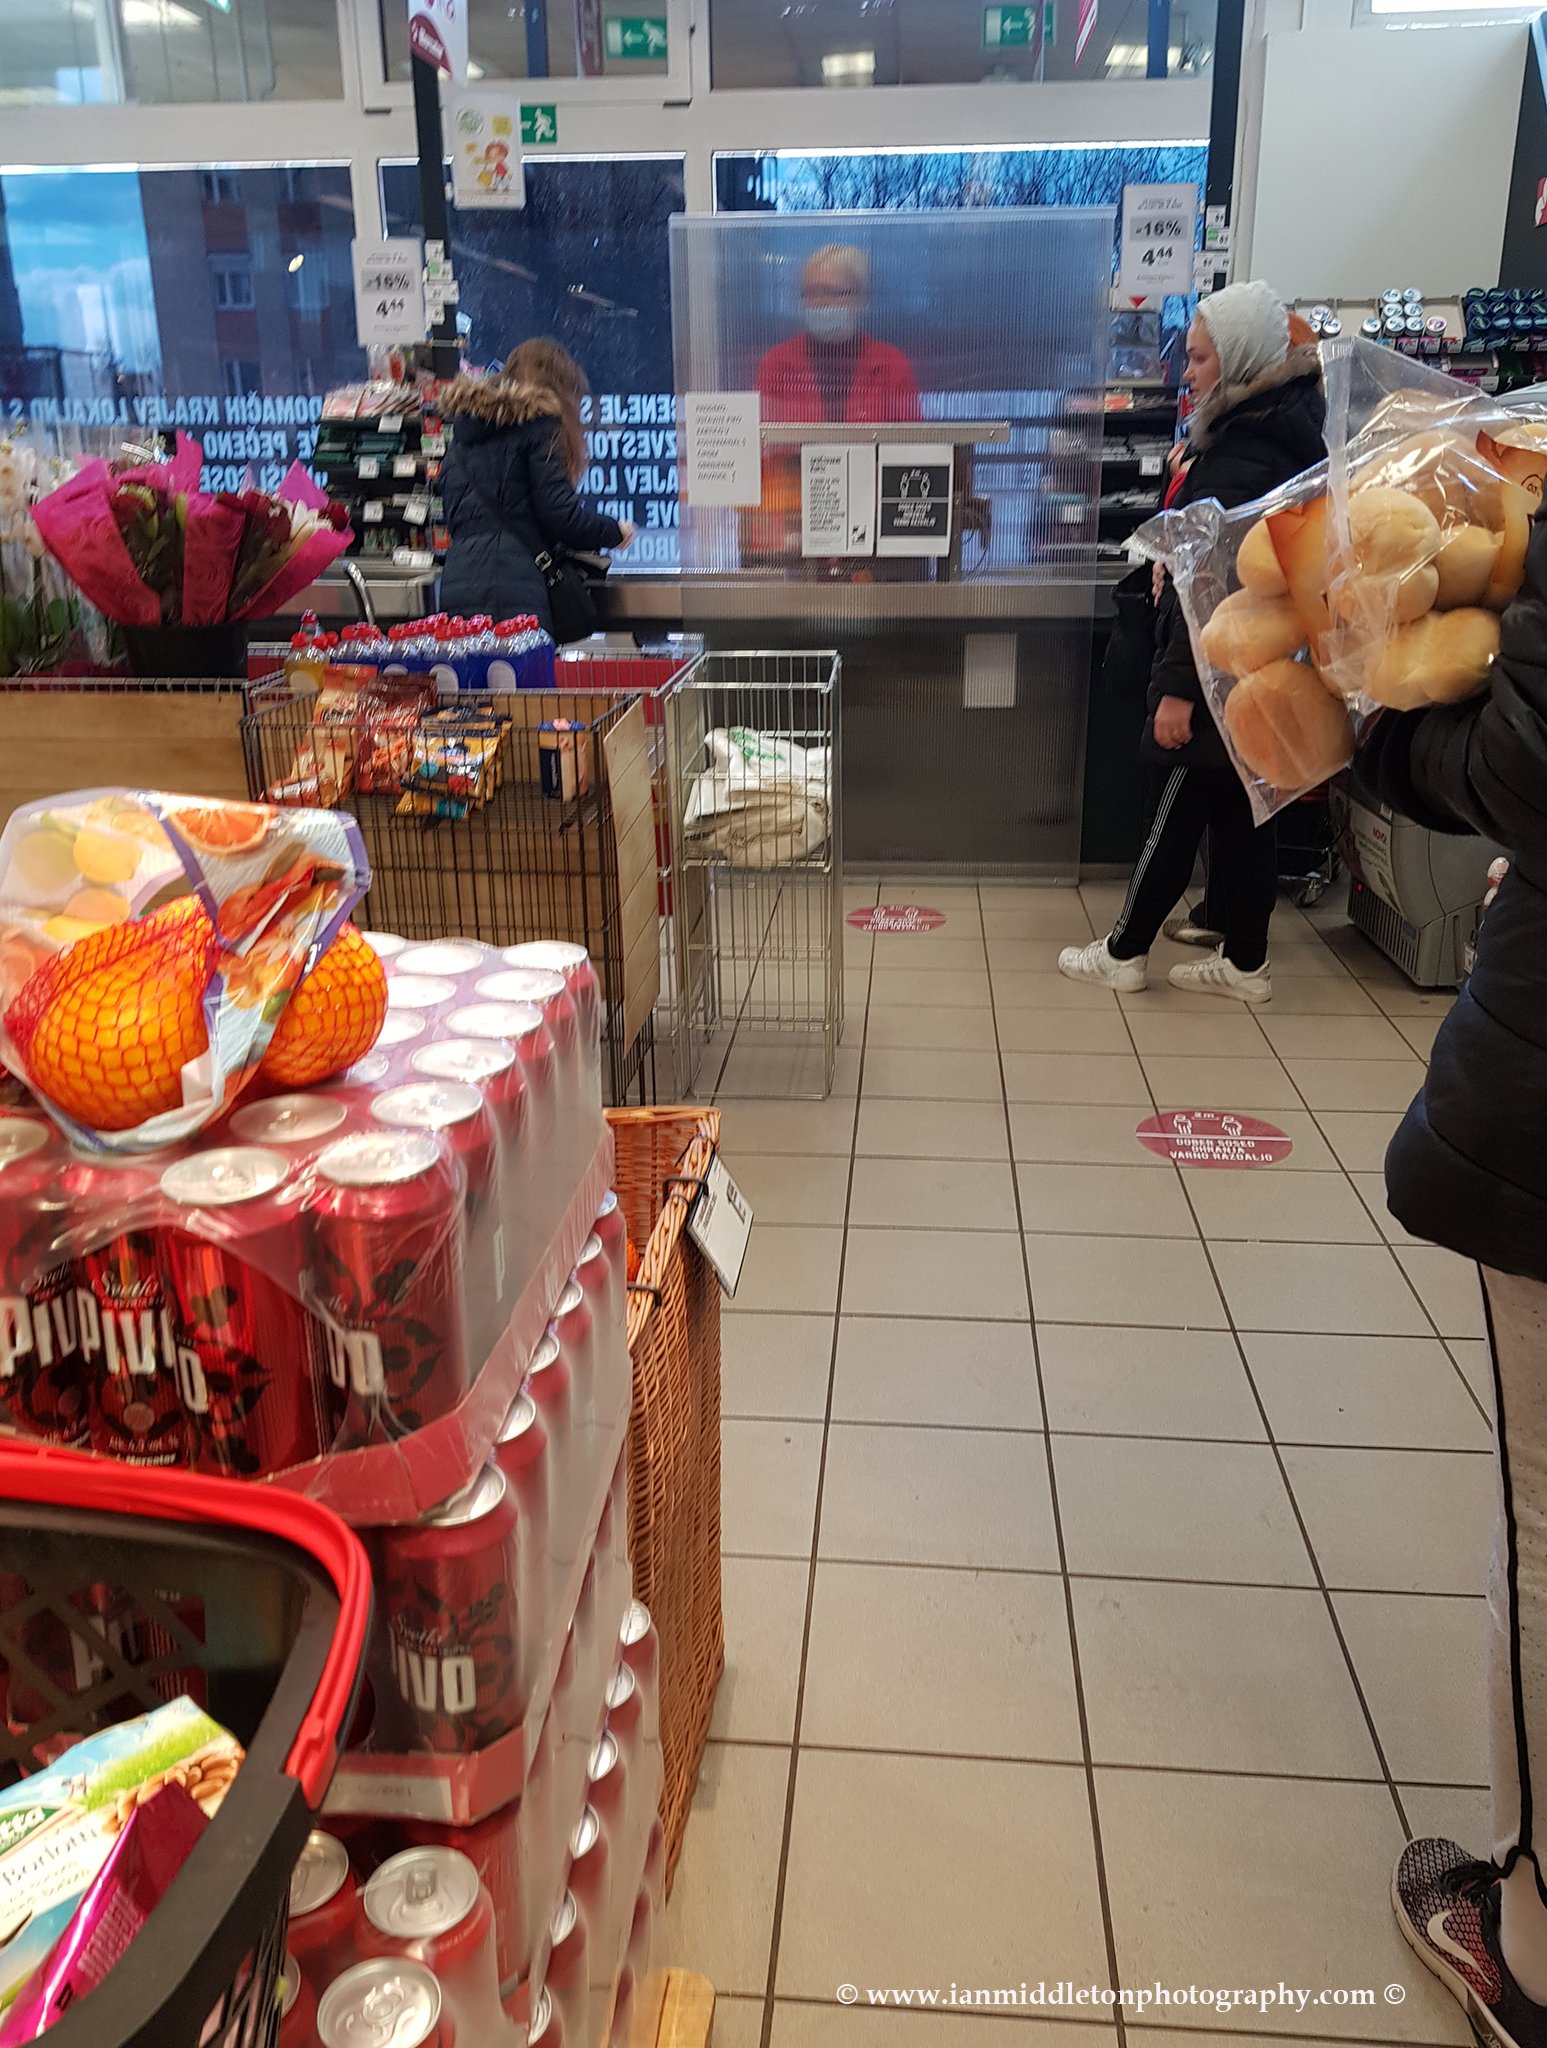 Queuing at the till in Mercator with the cashier behind a screen and wearing a mask. This is in a suburb of Ljubljana, Slovenia. Mercator is Slovenia's largest supermarket chain. Taken 23-3-2020